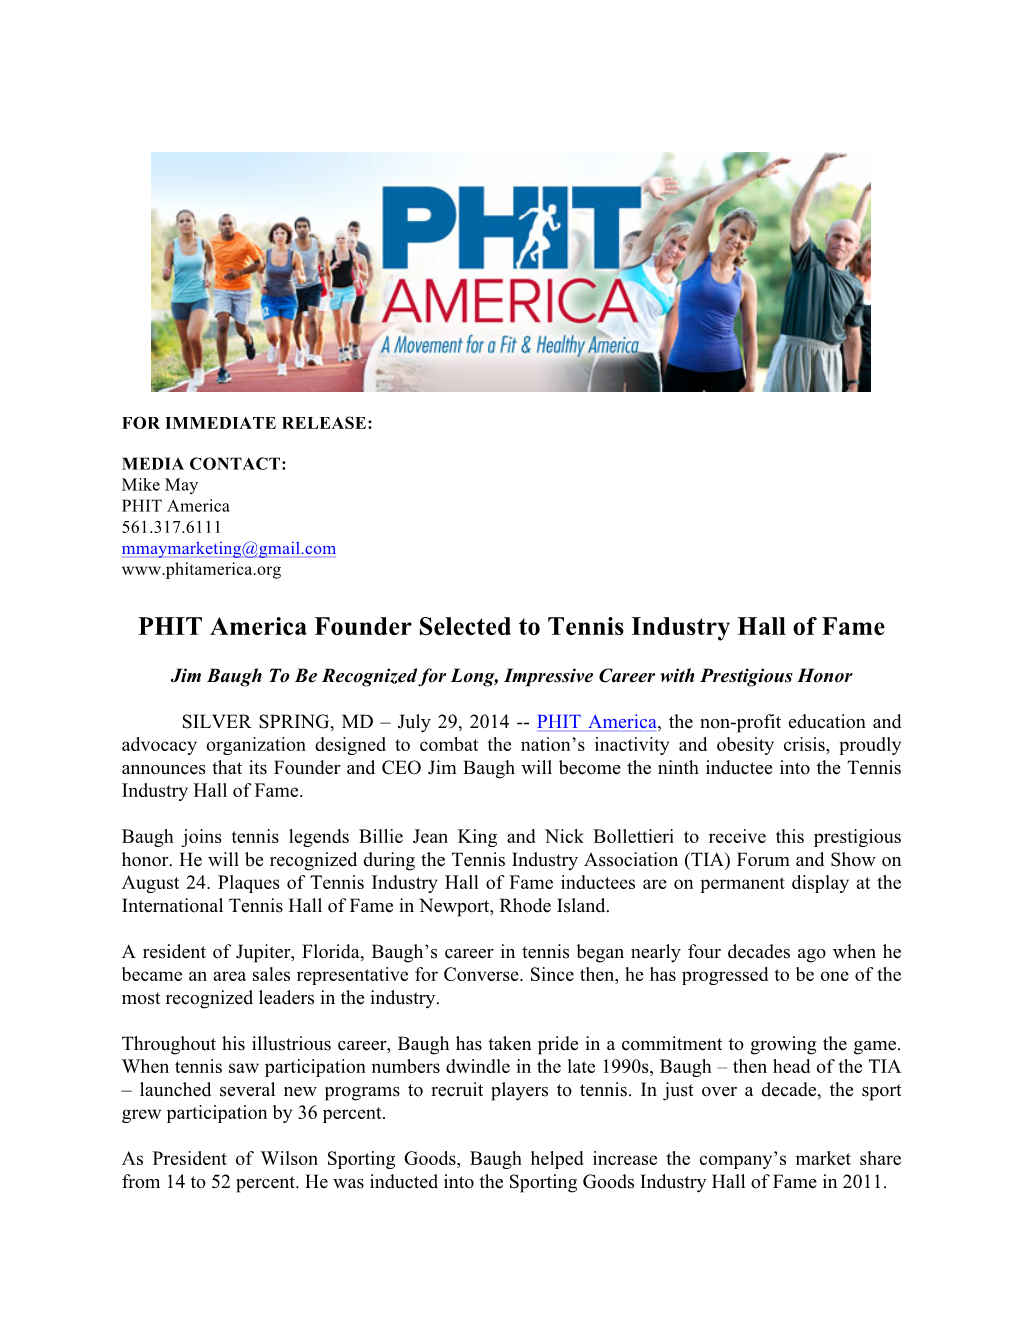 PHIT America Founder Selected to Tennis Industry Hall of Fame